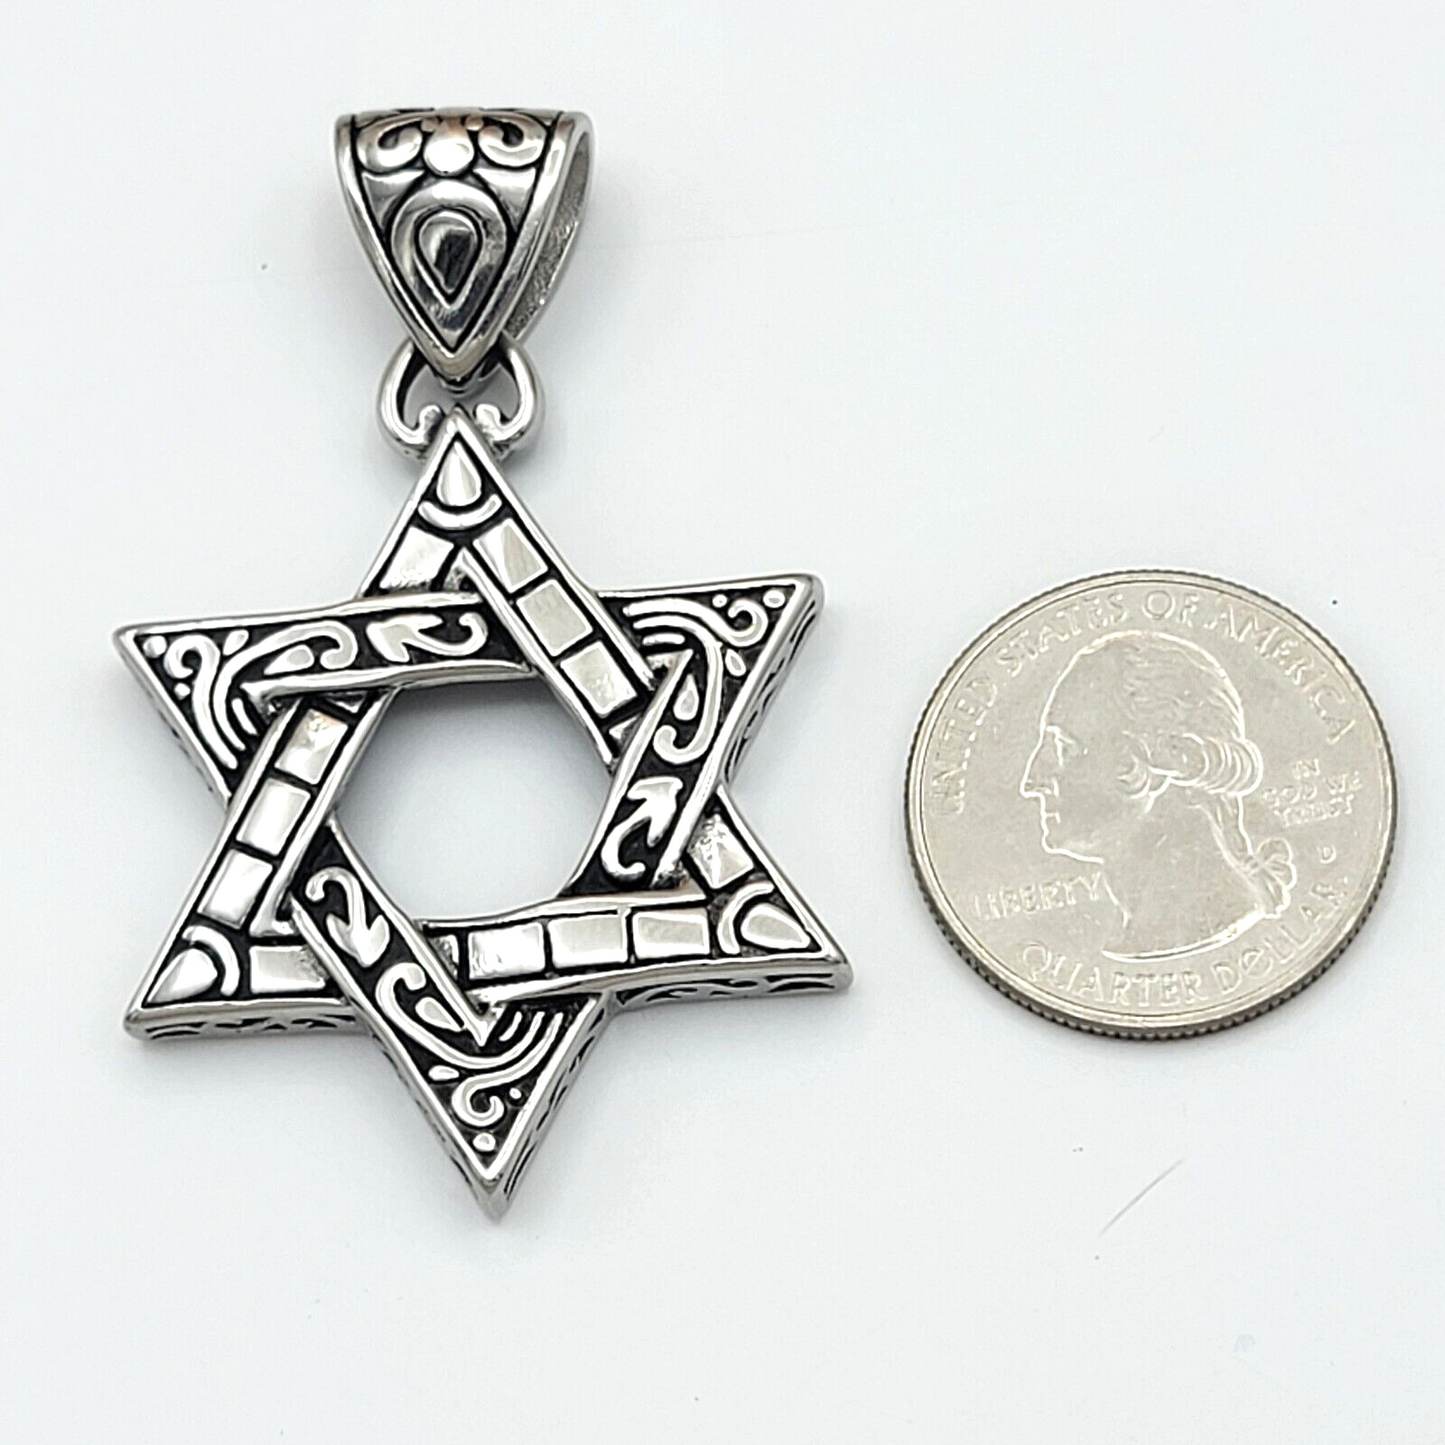 Necklaces - Stainless Steel. David Star Pendant & Chain Necklace Celtic 6 Point Star Hexagram